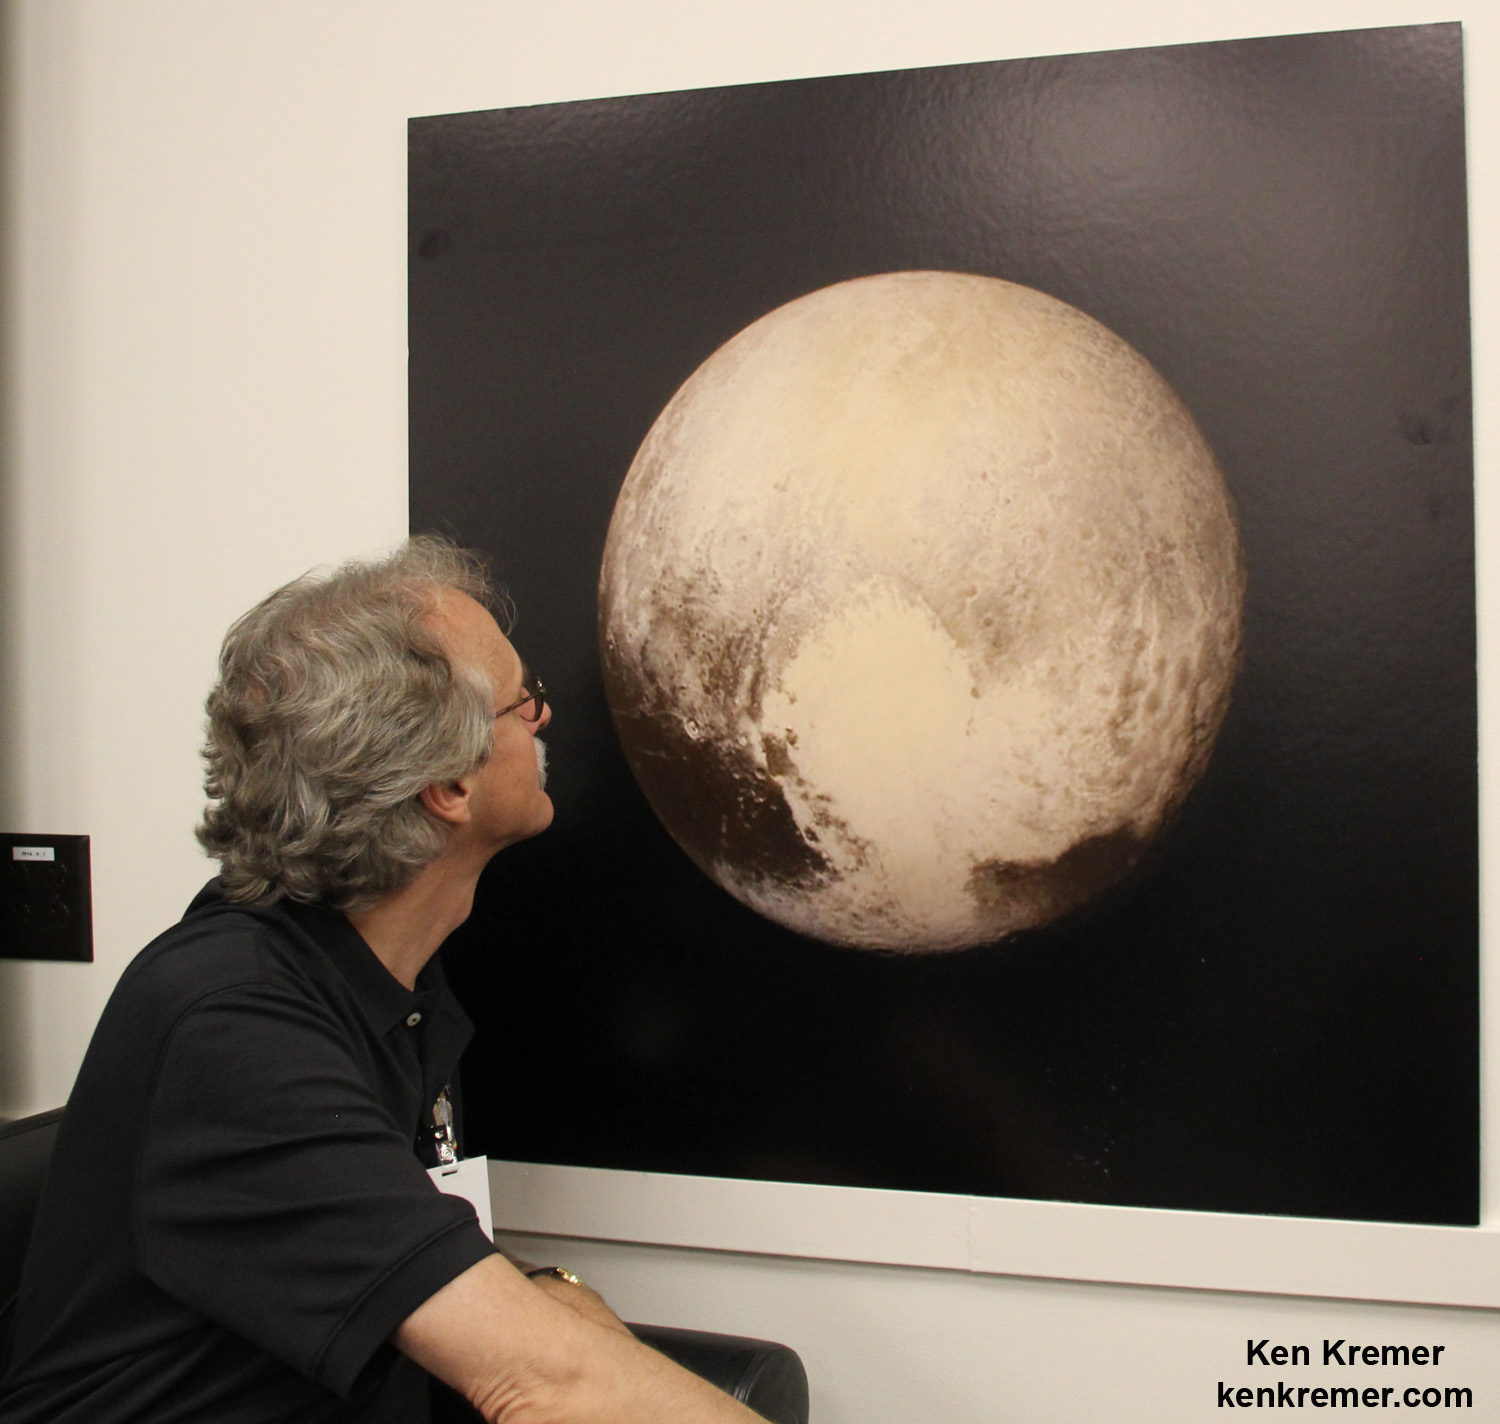 New Horizons science team co-investigator John Spencer examines print of the newest Pluto image taken on July 13, 2015 after the successful Pluto flyby. Credit: Ken Kremer/kenkremer.com 